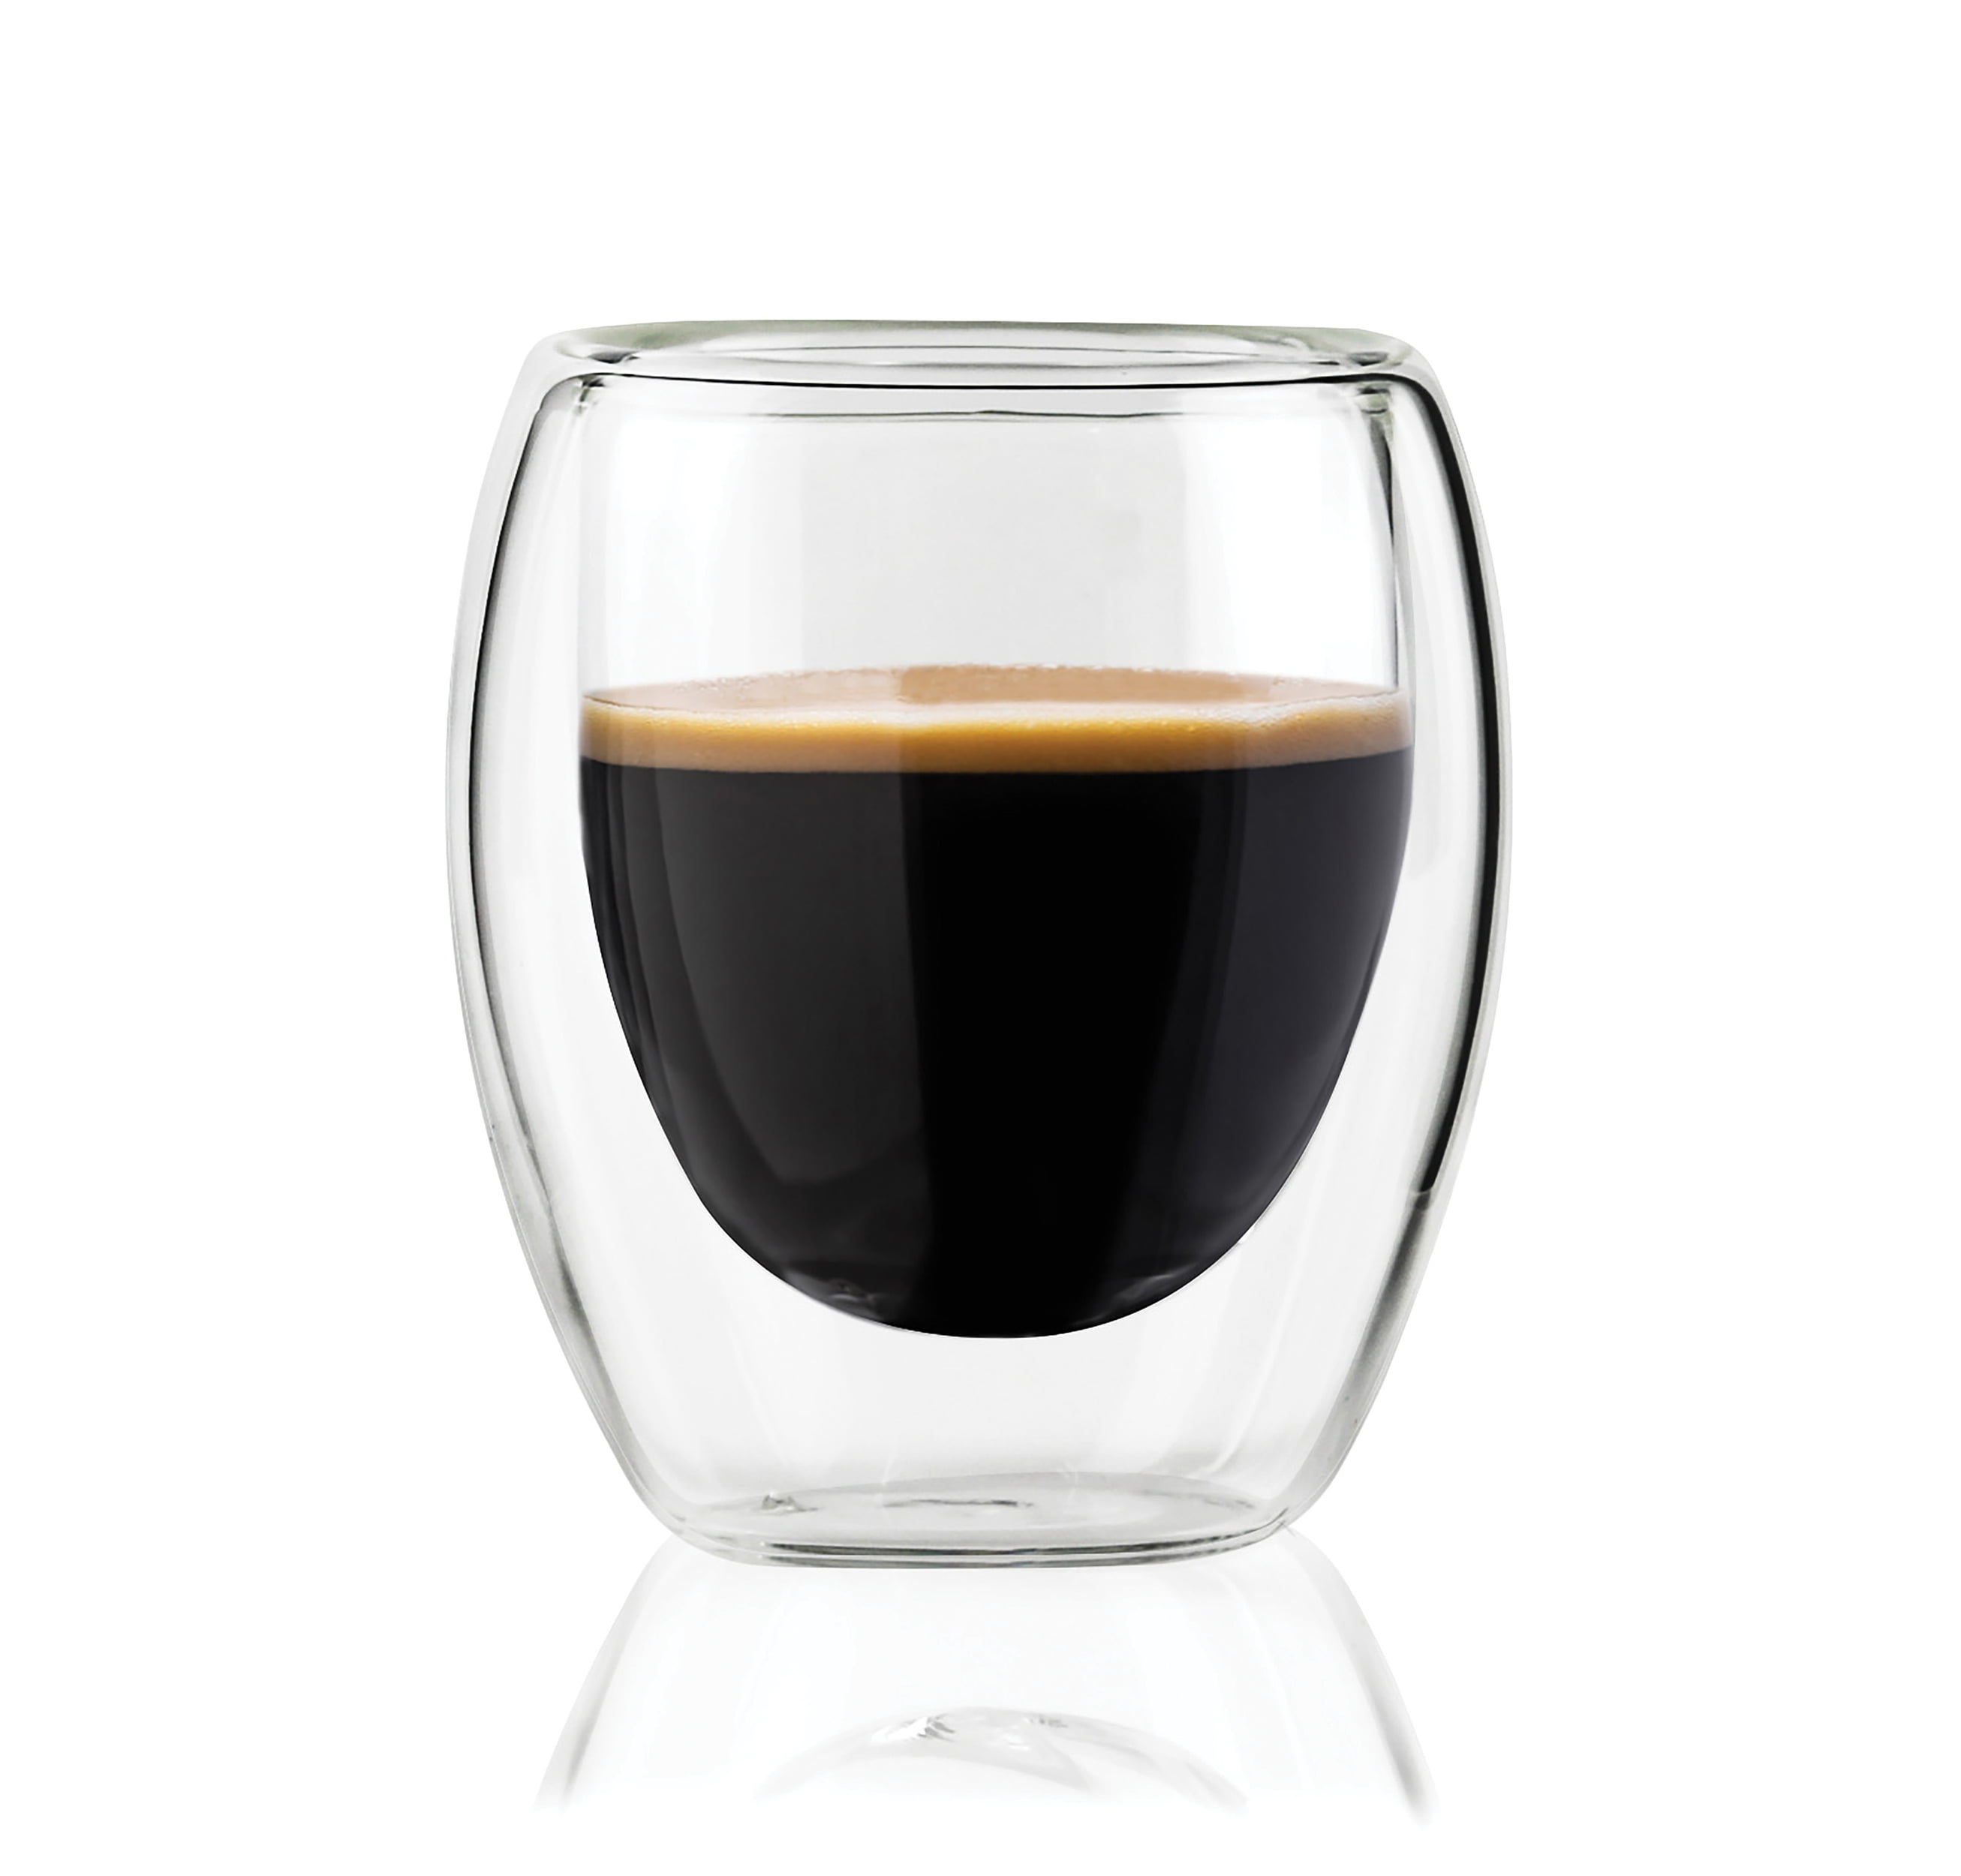 Thermax Set of 2- Double Wall Insulated Glass Latte Cups - 10.4 oz